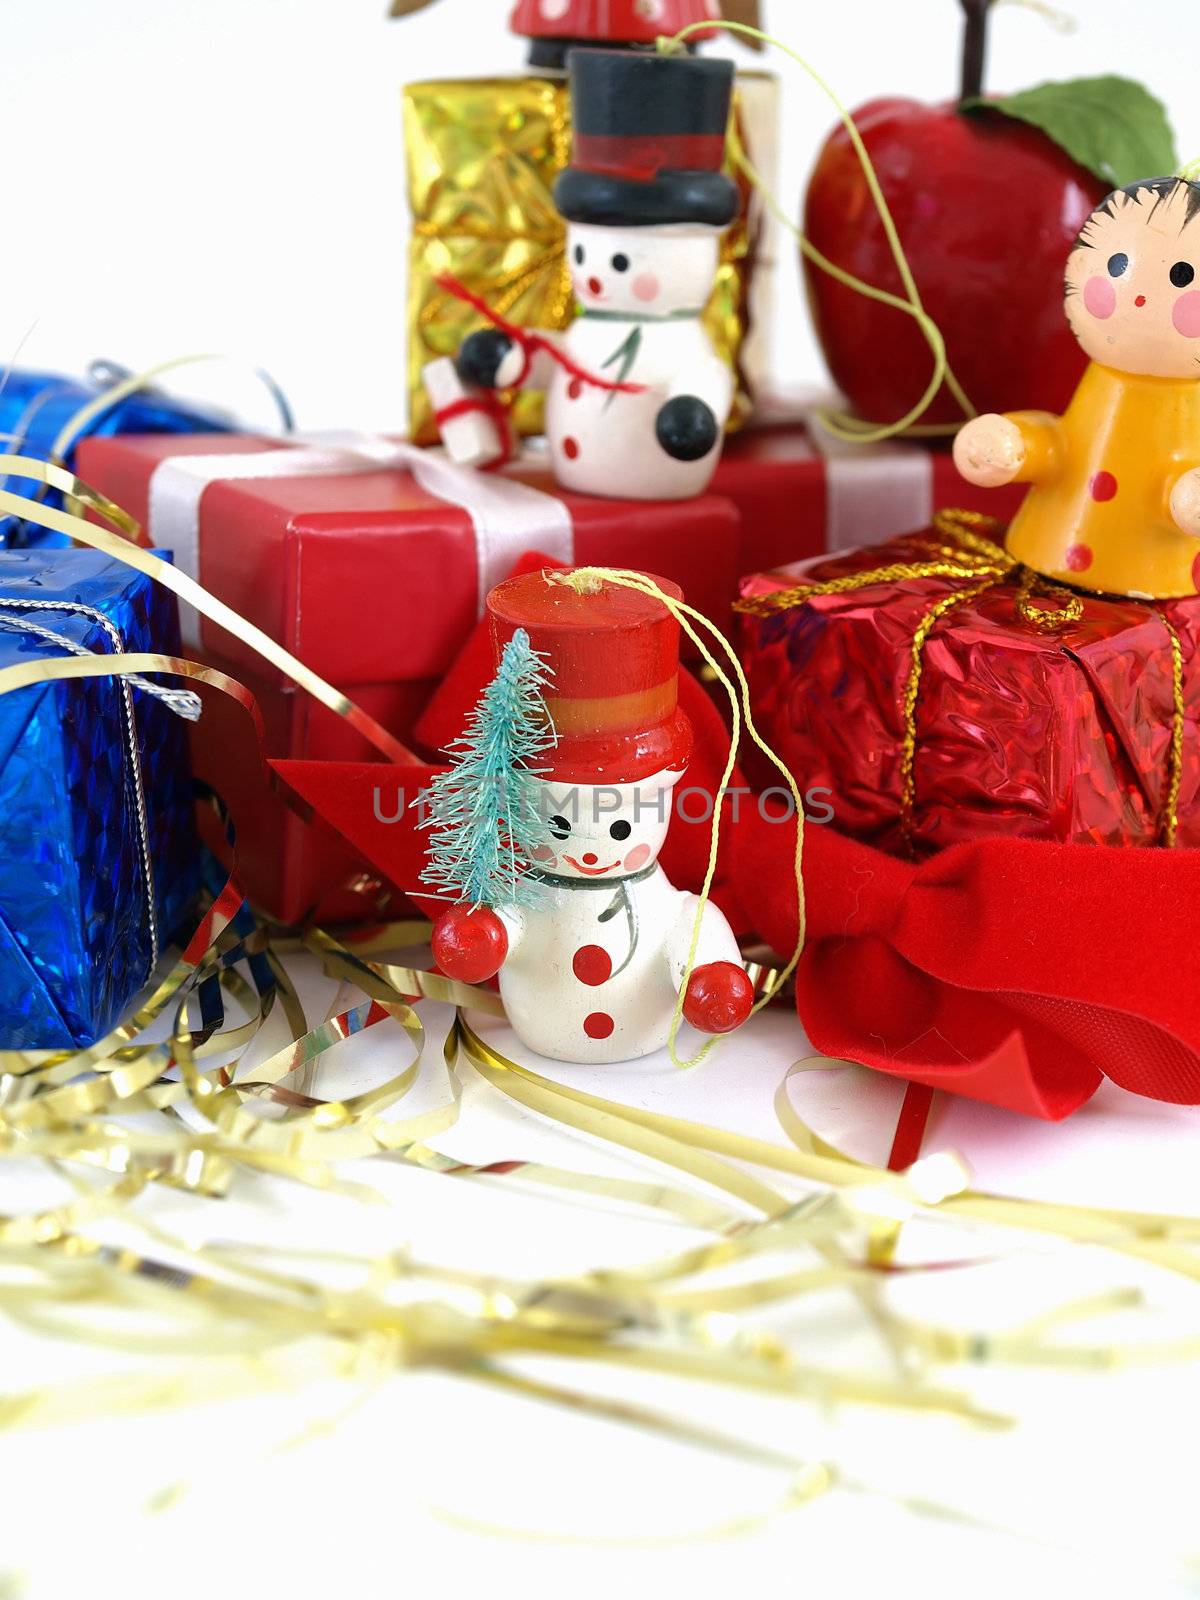 Cute colorful wooden Christmas tree ornaments, displayed with colorful wrapped presents. Over white.